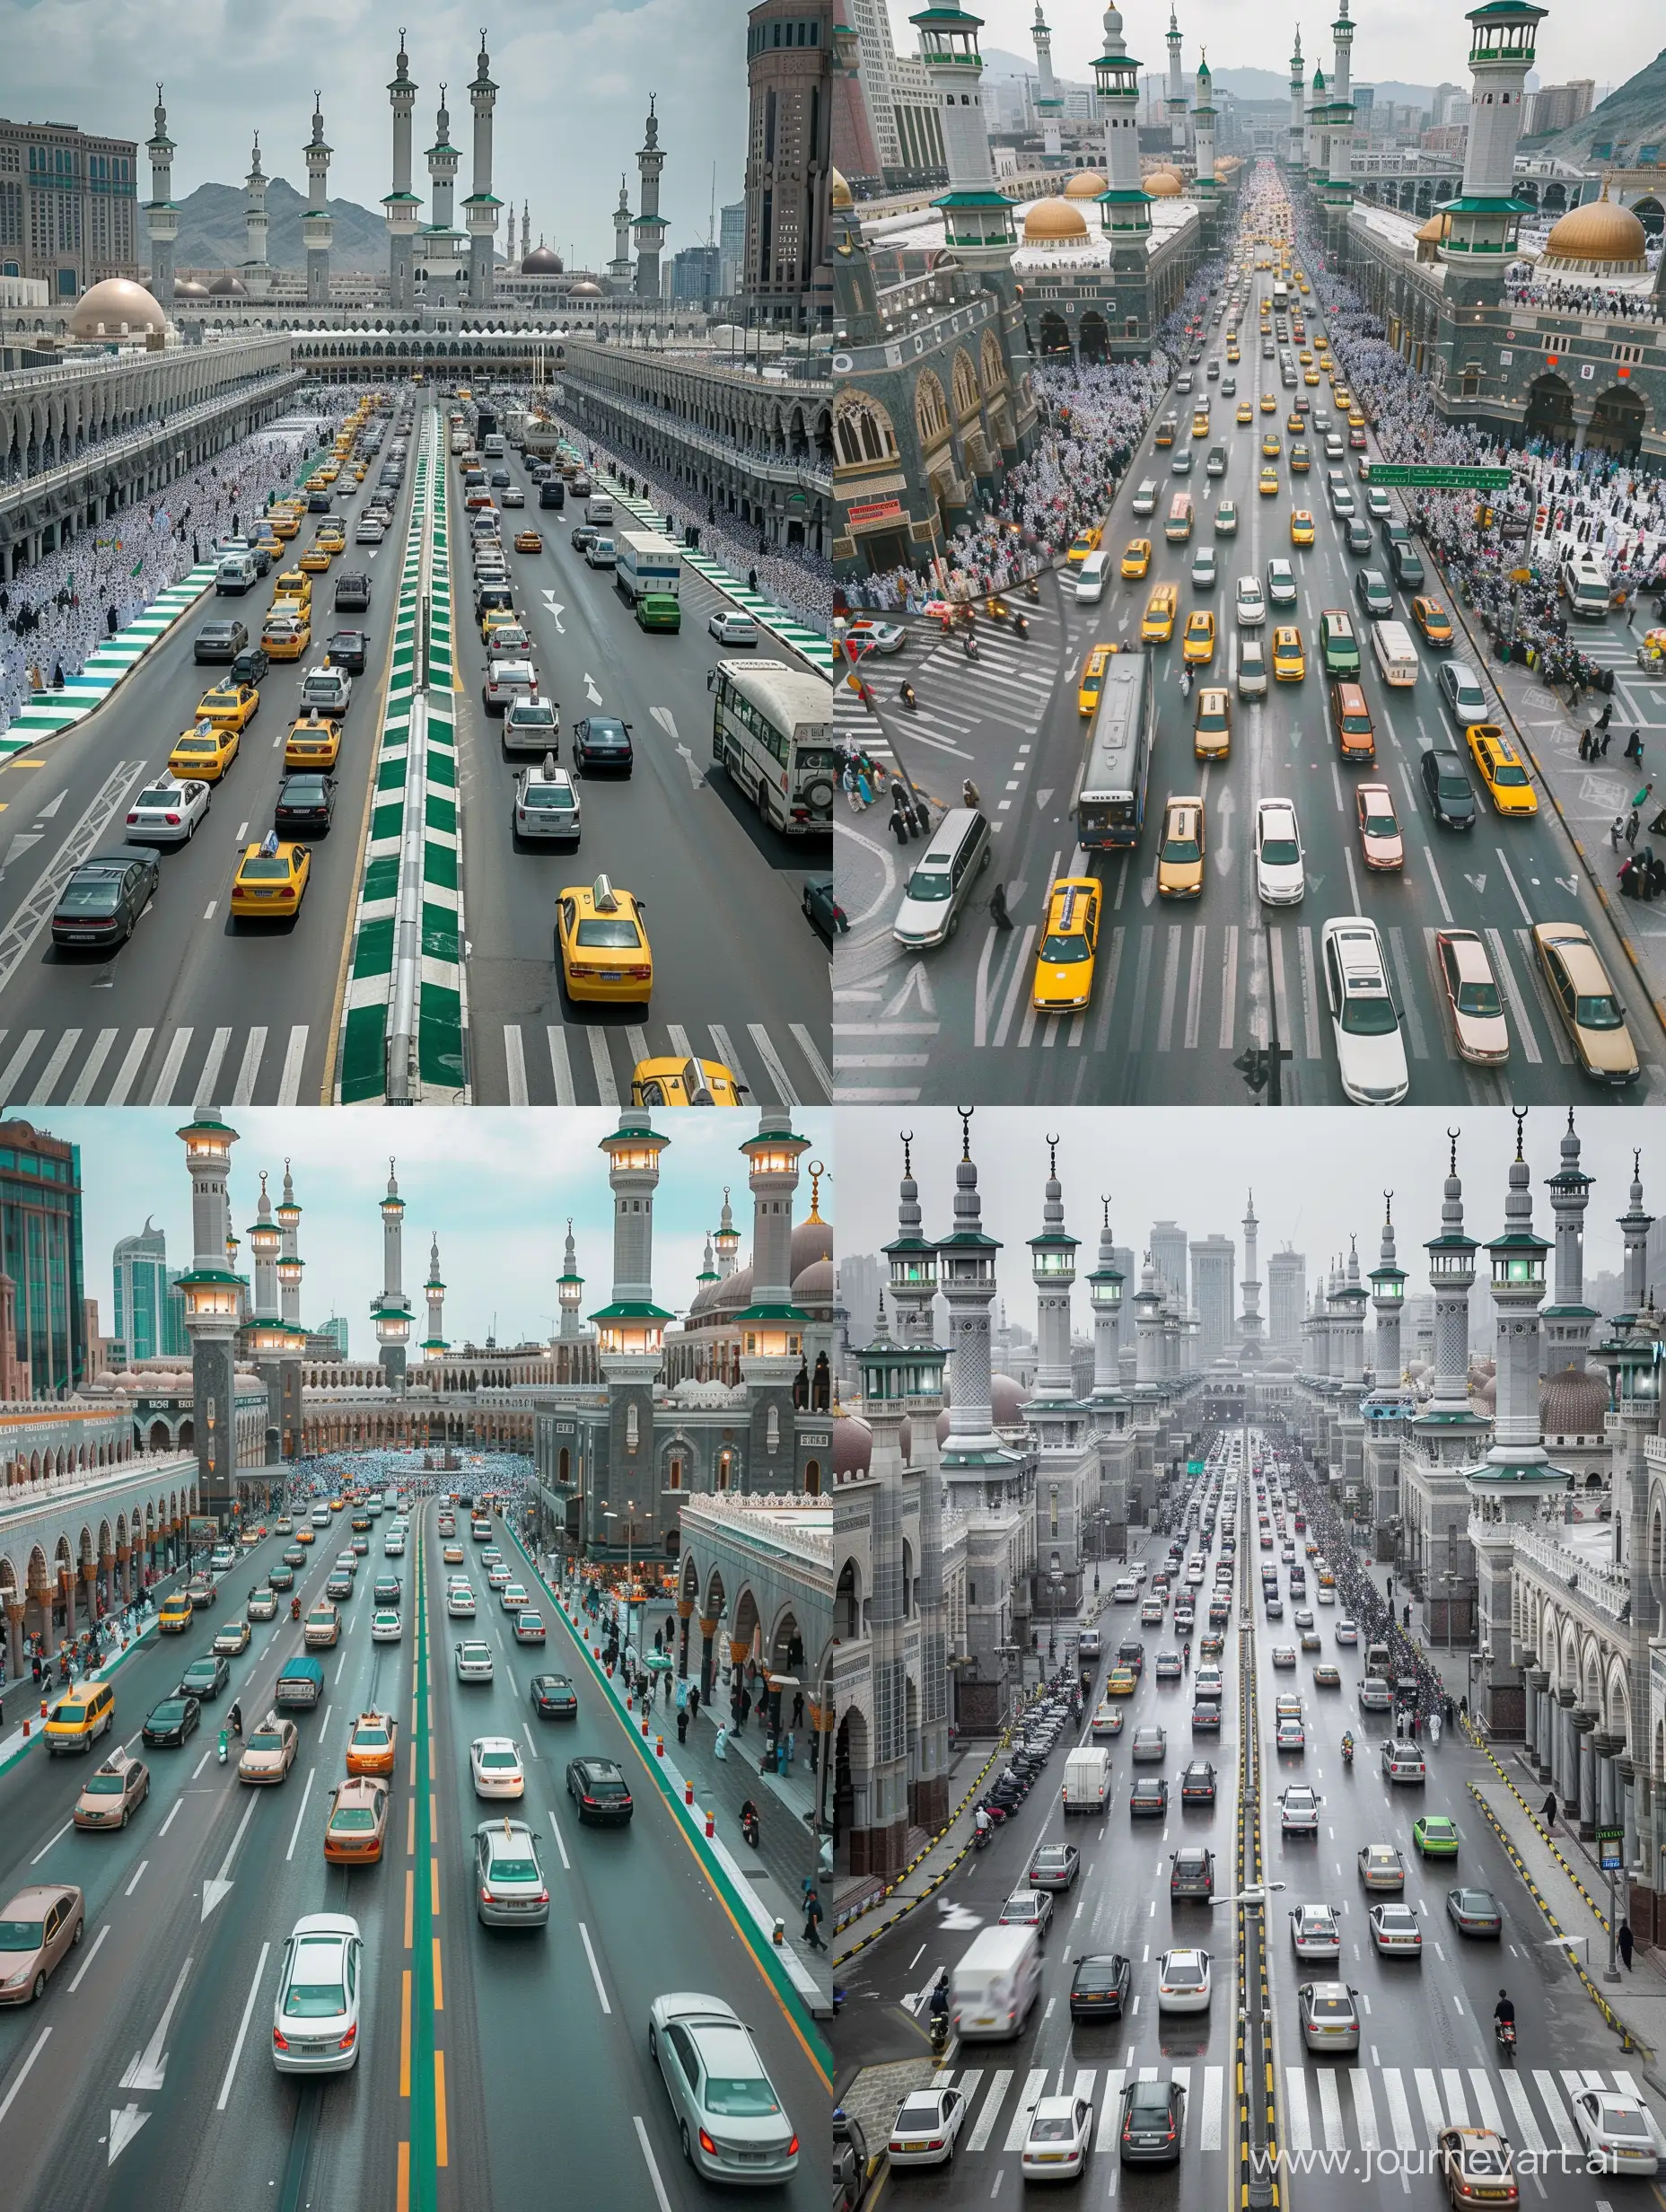 a Newyork like crosswalk full of traffic in Mecca mosque, Great mosque of Mecca mosques lined along the streets, all having Masjid al Haram exterior and grey green white marbled Masjid al Haram facades and minarets, high angle shot